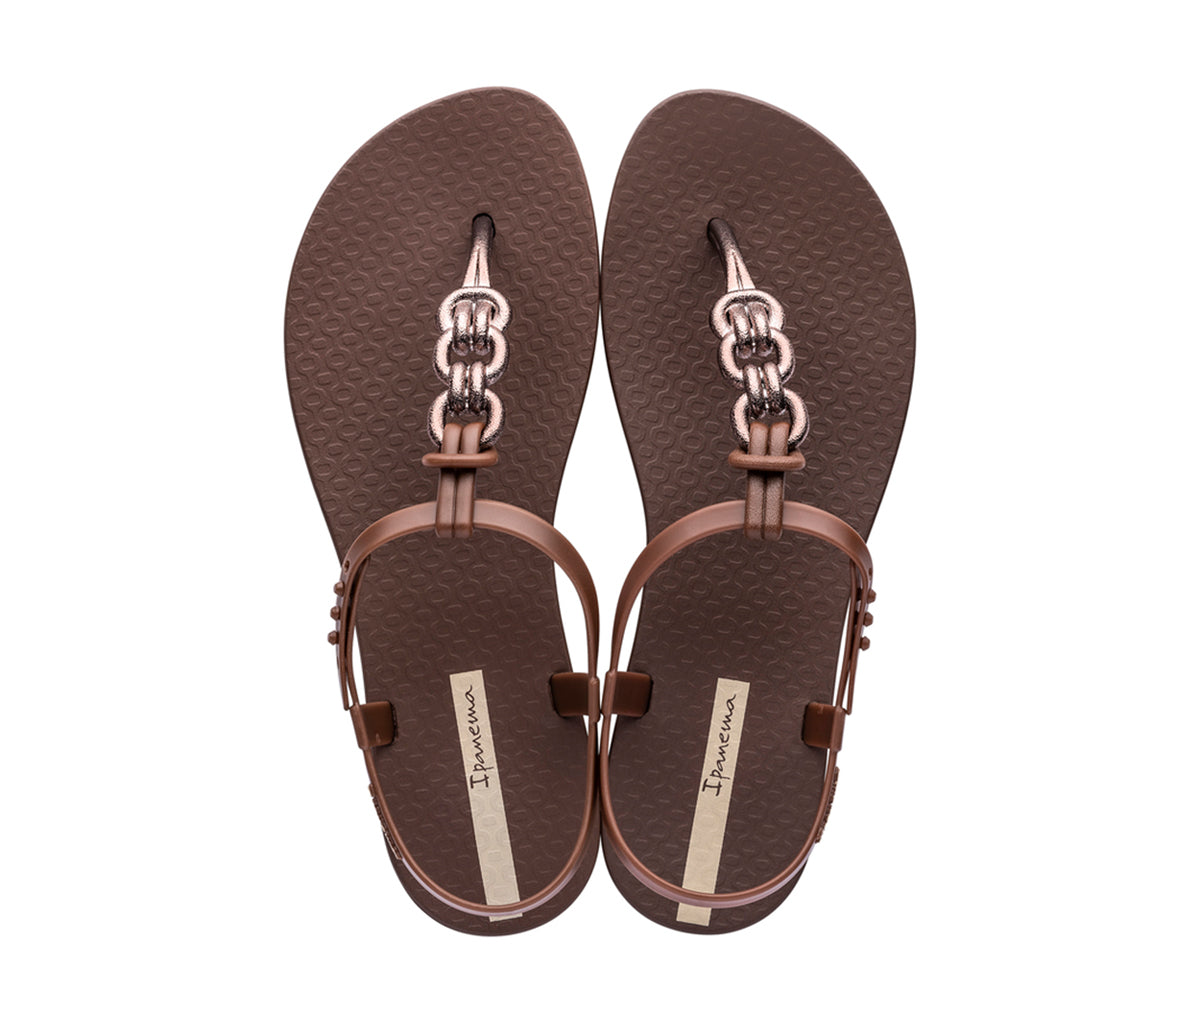 Top view of a pair of brown Ipanema Connect sandals with a bronze chain inspired t-strap.